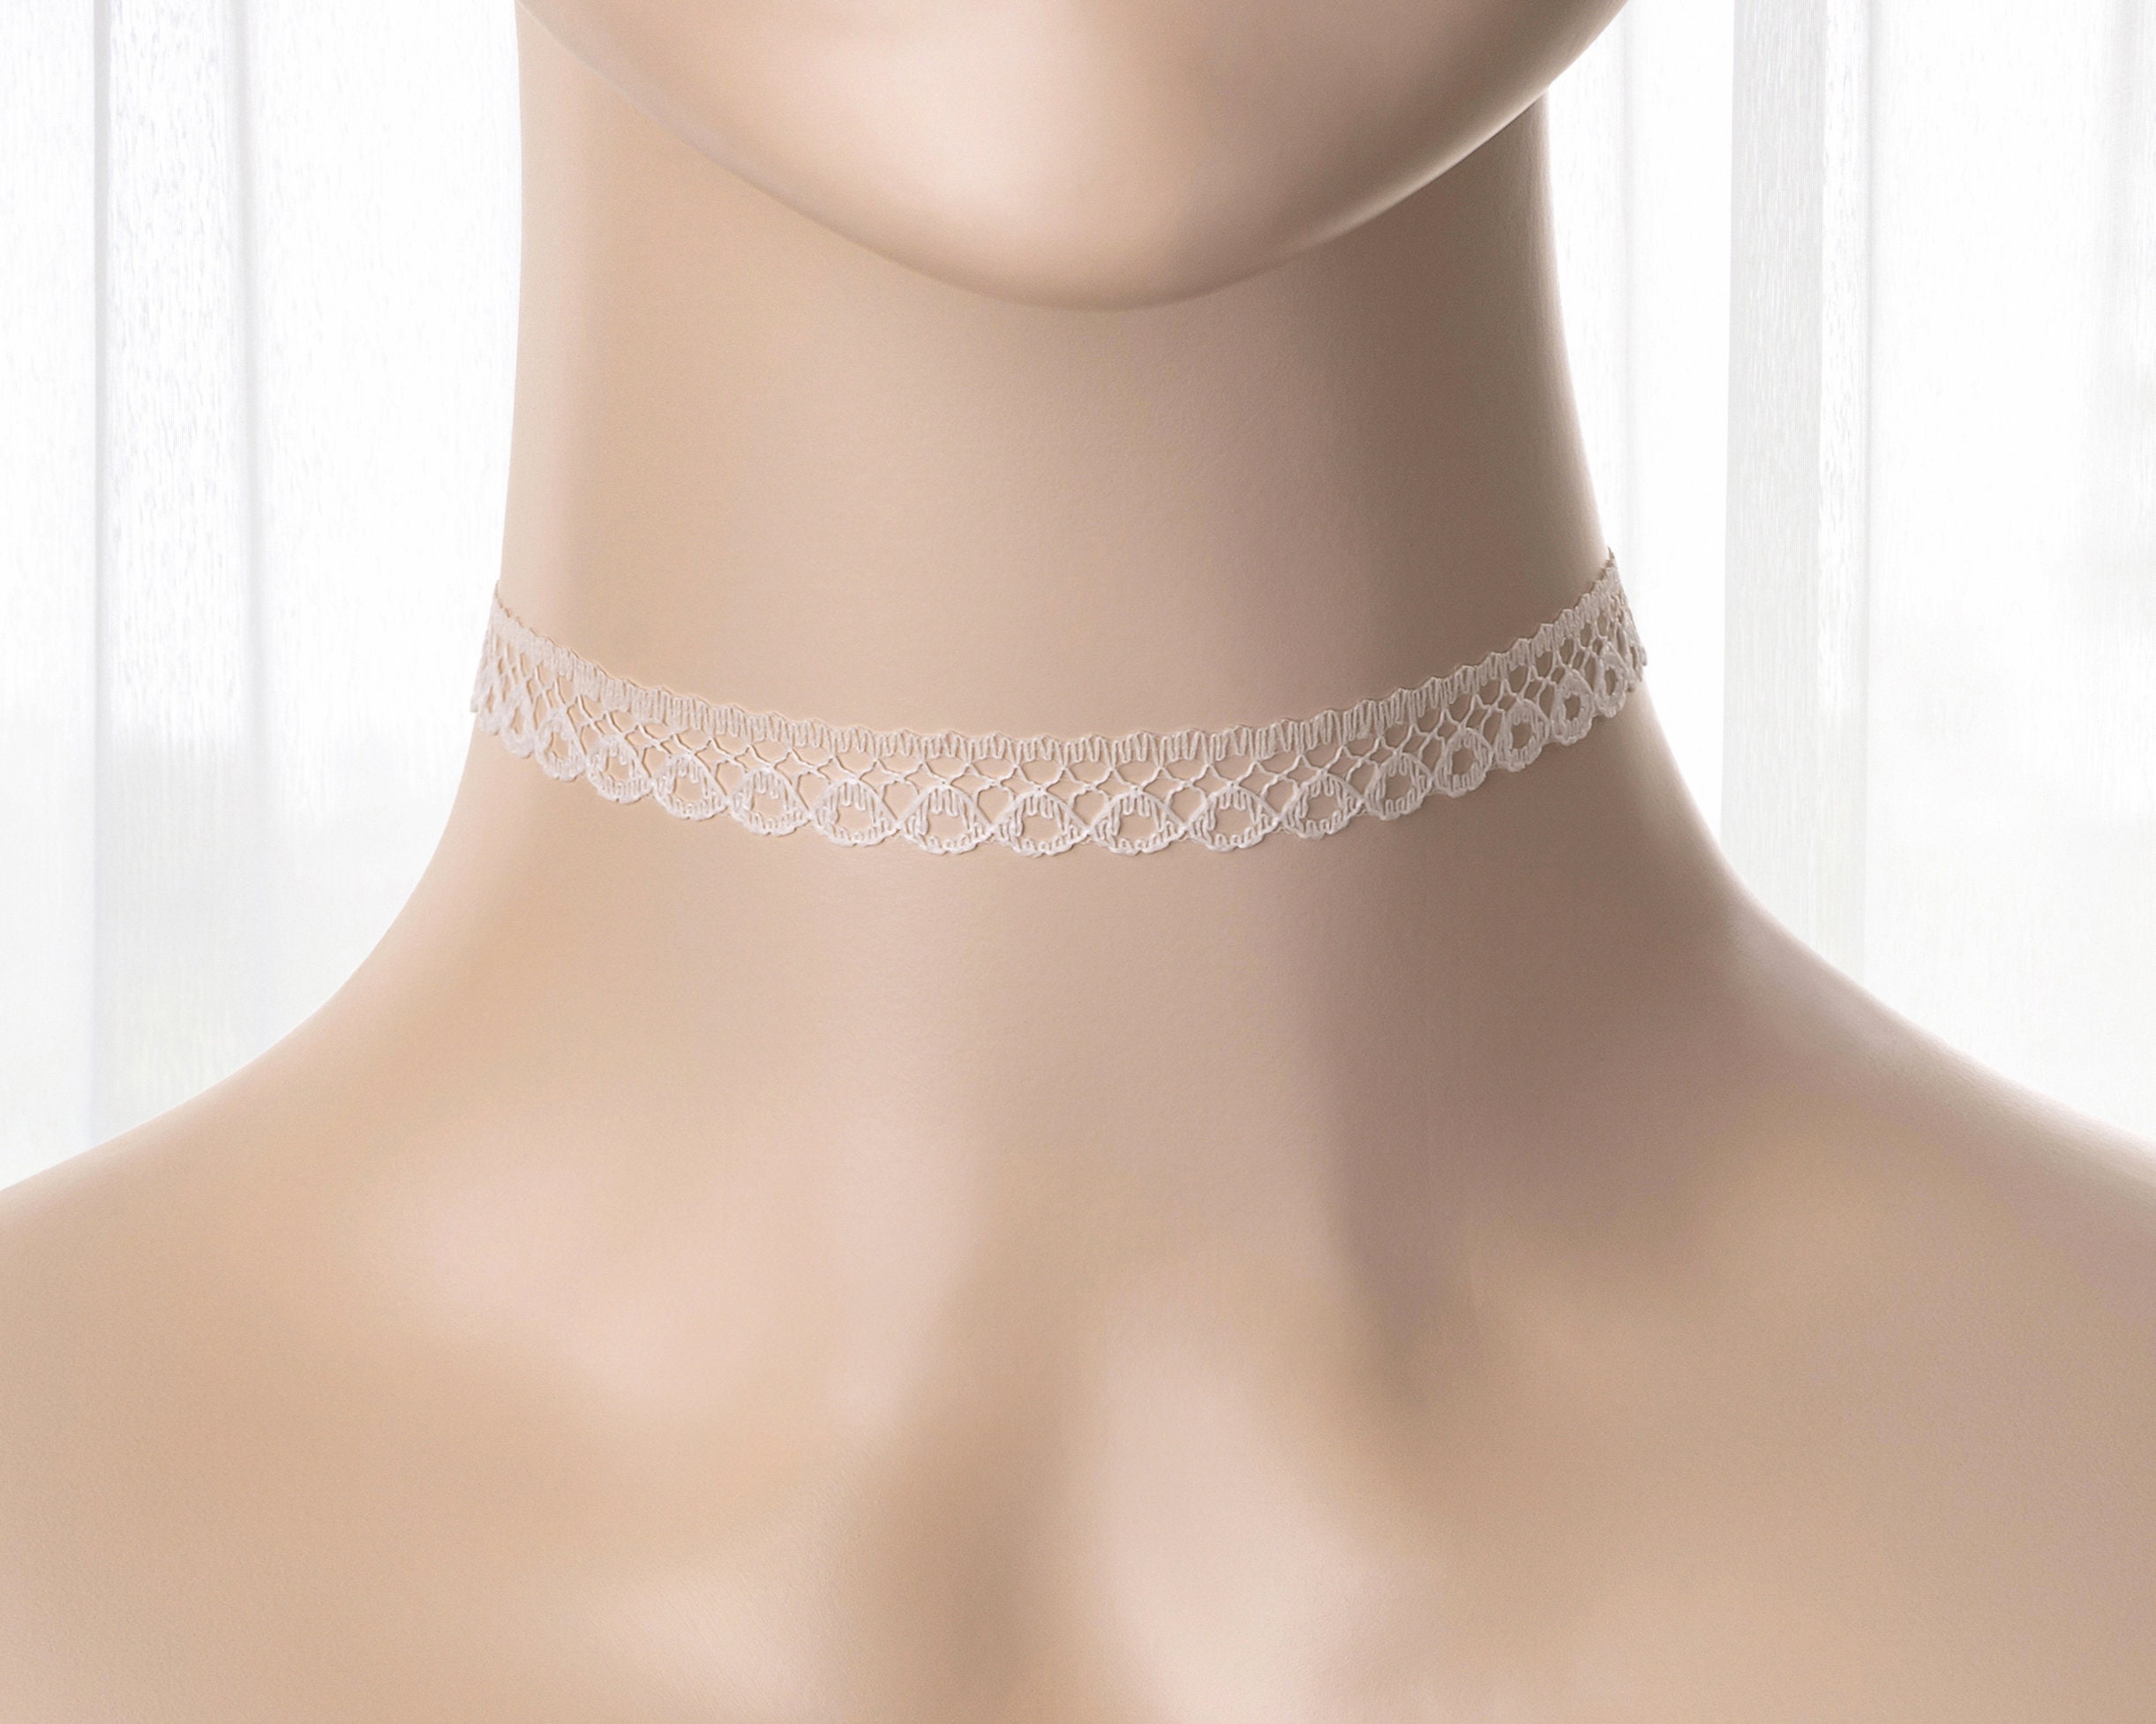 Chokers - Buy Chokers Online Starting at Just ₹43